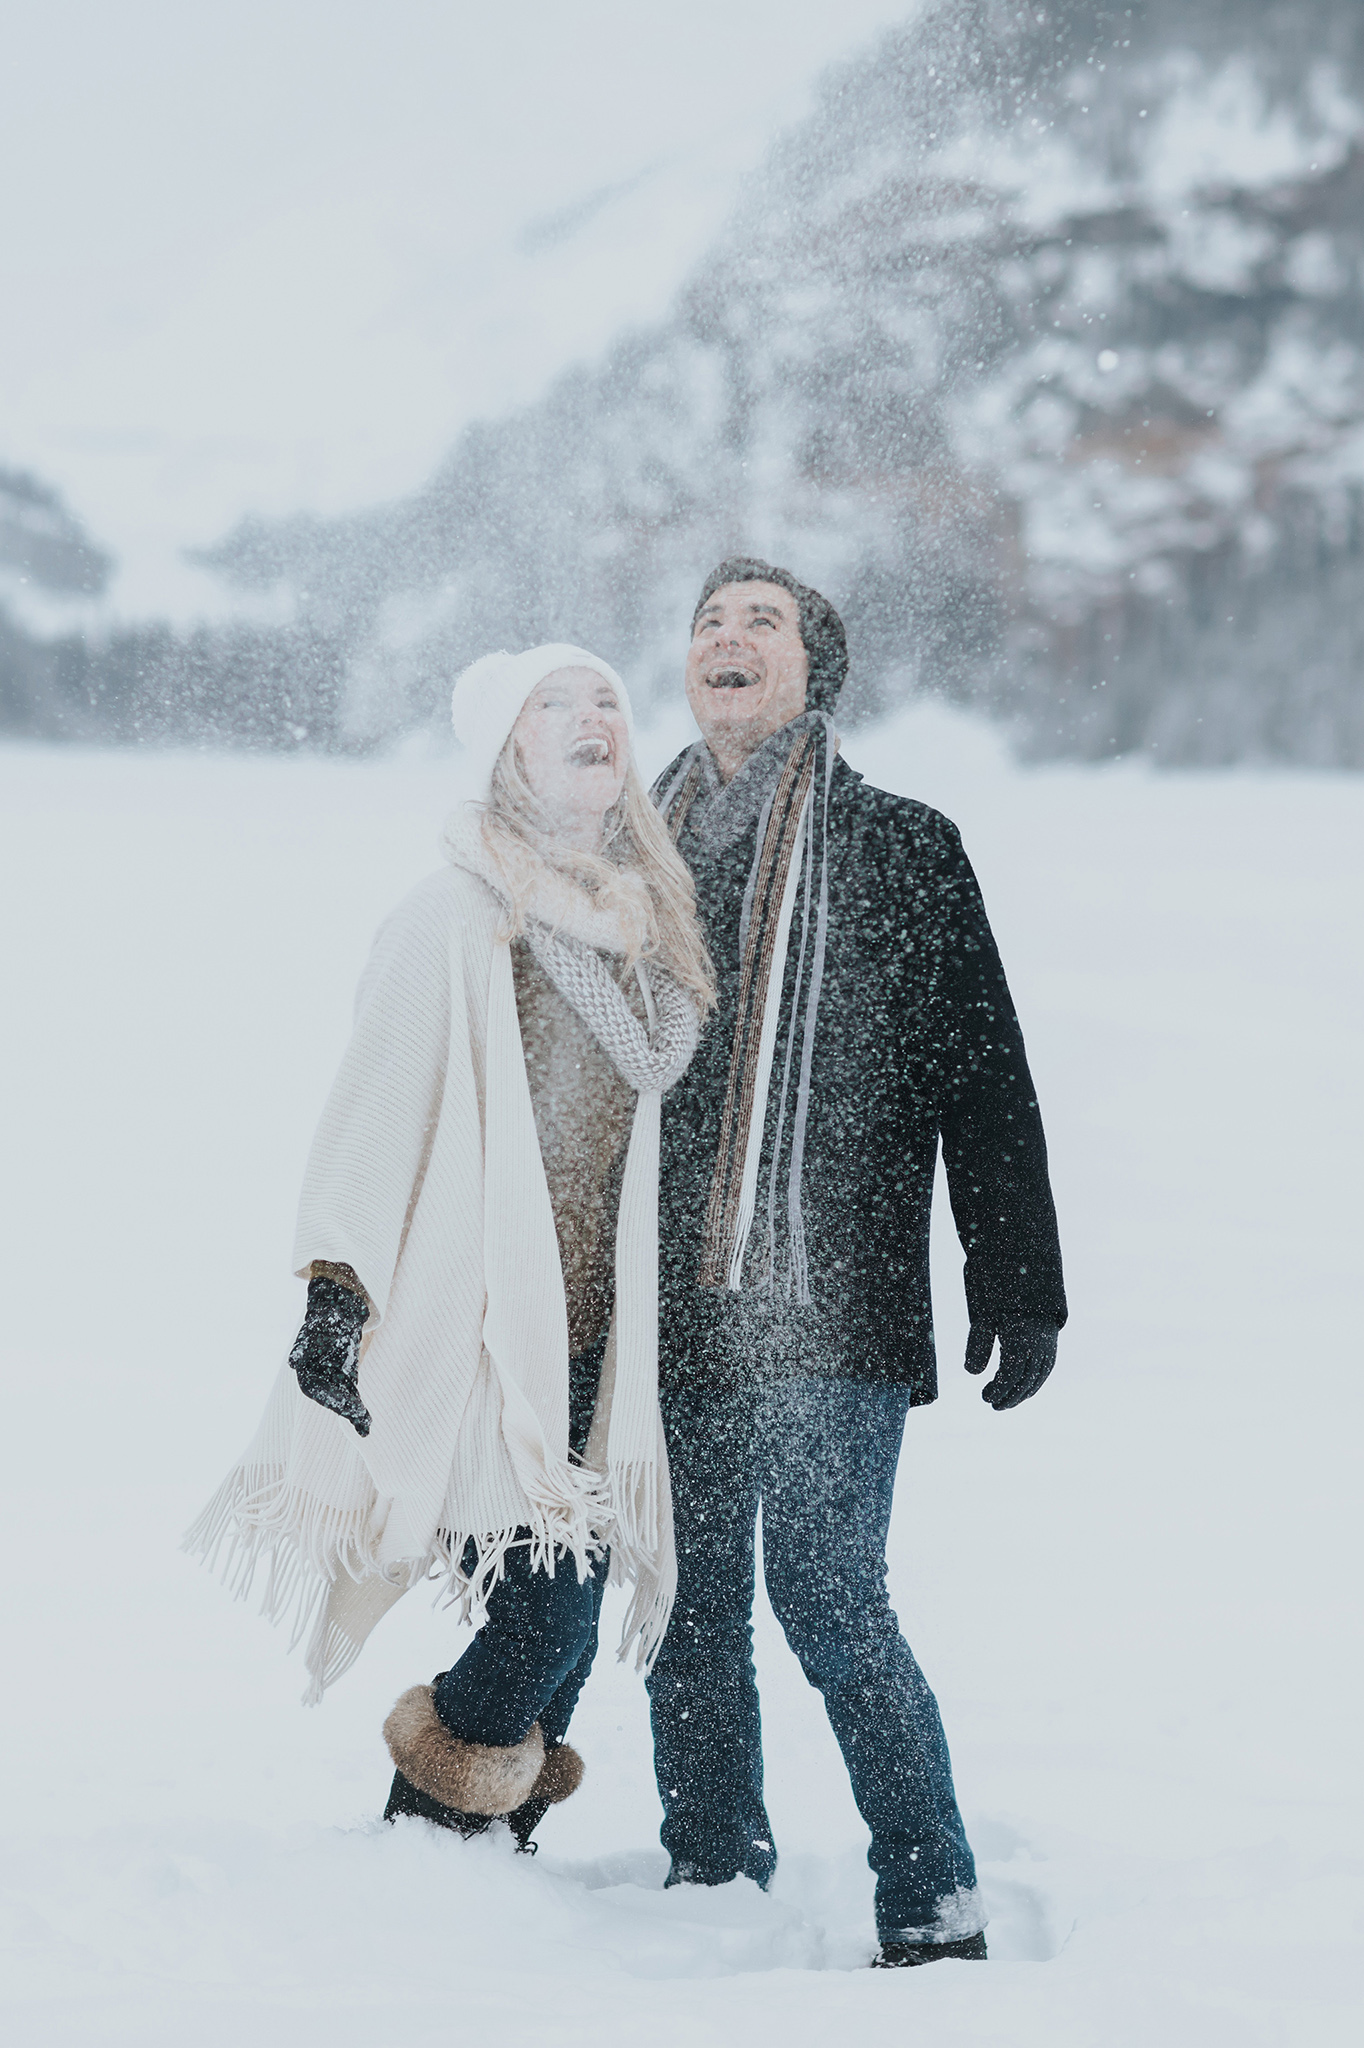 couples session playing in the snow during a winter wonderland in the Canadian Rocky mountains